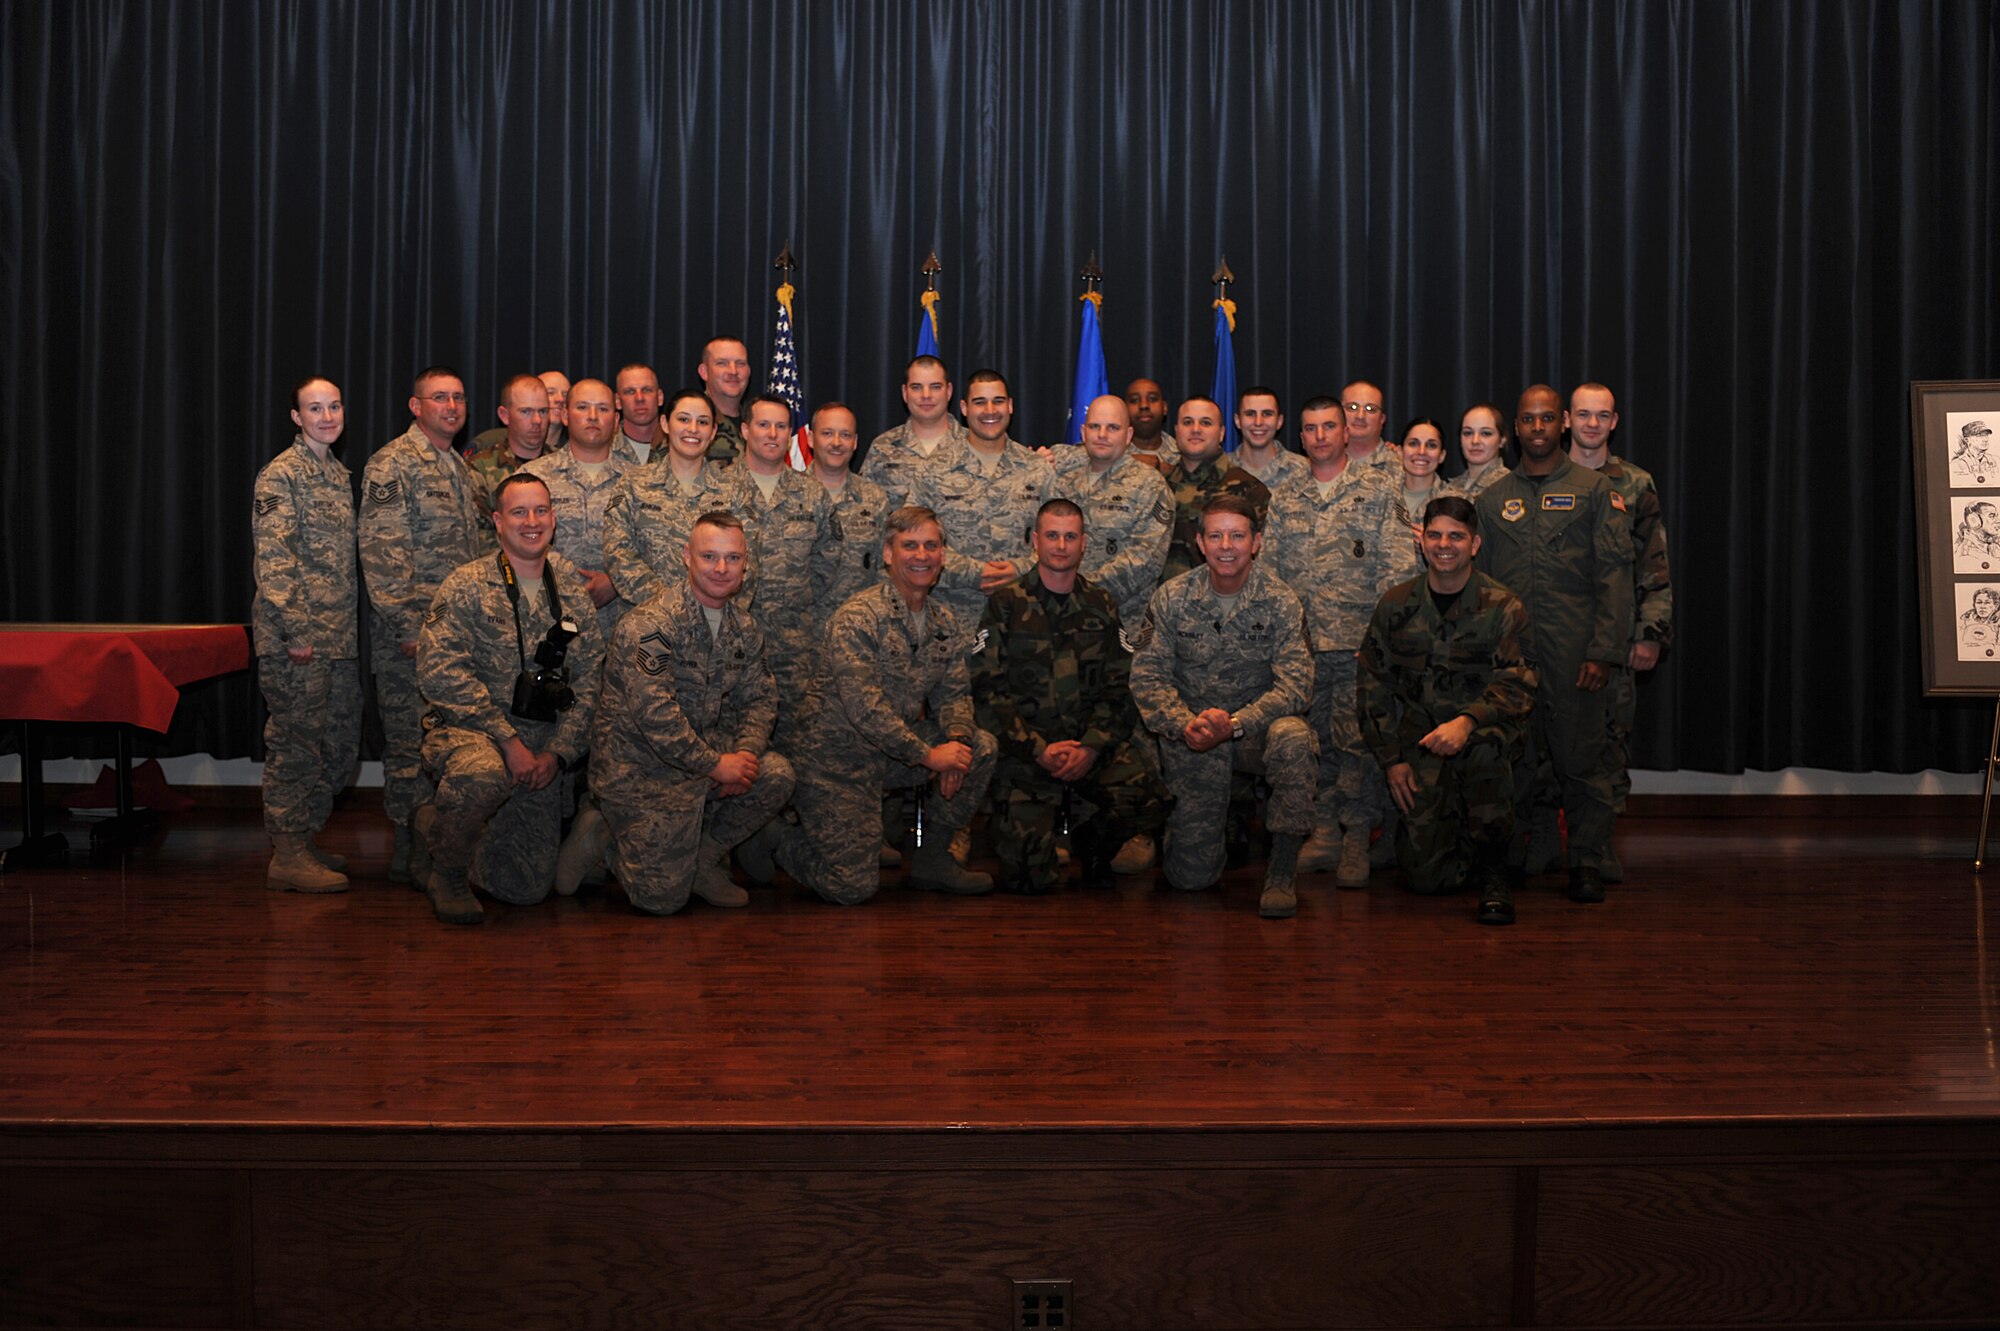 Members of the 421st Combat Training Squadron pose for a picture with Tech. Sgt. Jonathan Tourville, 421st CTS assistant NCO in charge of the Advanced Contingency Skills Training Course, Maj. Gen. Kip Self, U.S. Air Force Expeditionary Center commander, and Chief Master Sgt. of the Air Force Rodney McKinley during Chief McKinley’s visit to the Expeditionary Center at Fort Dix, N.J., Feb. 10, 2009.  Sergeant Tourville was promoted to technical sergeant through the Stripes for Exceptional Performers Program by General Self.  (U.S. Air Force Photo/Staff Sgt. Nathan Bevier)